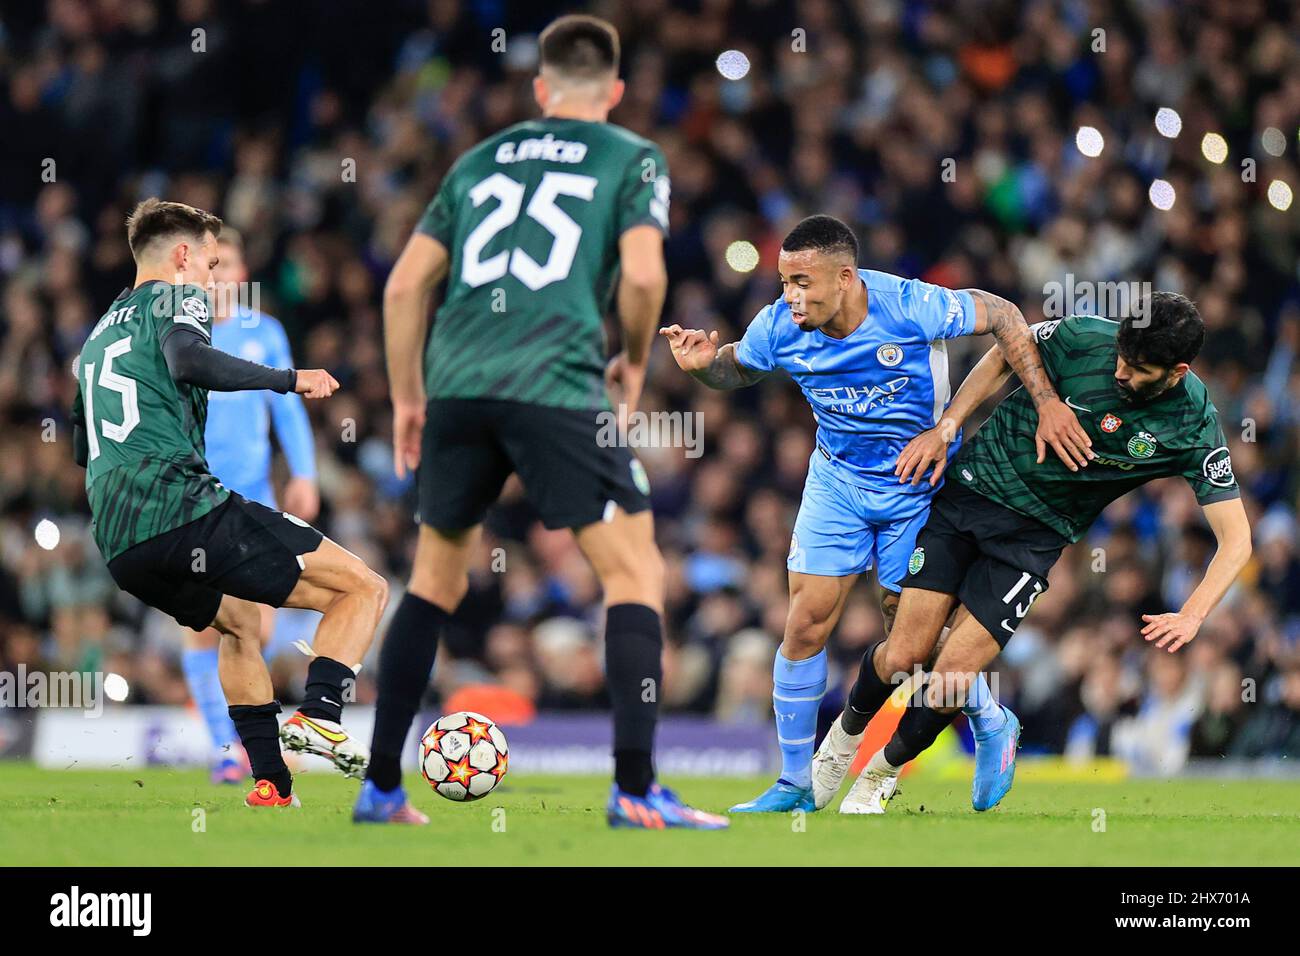 Gabriel Jesus #9 of Manchester City  and Luis Neto #13 of Sporting Lisbon challenge for the ball Stock Photo